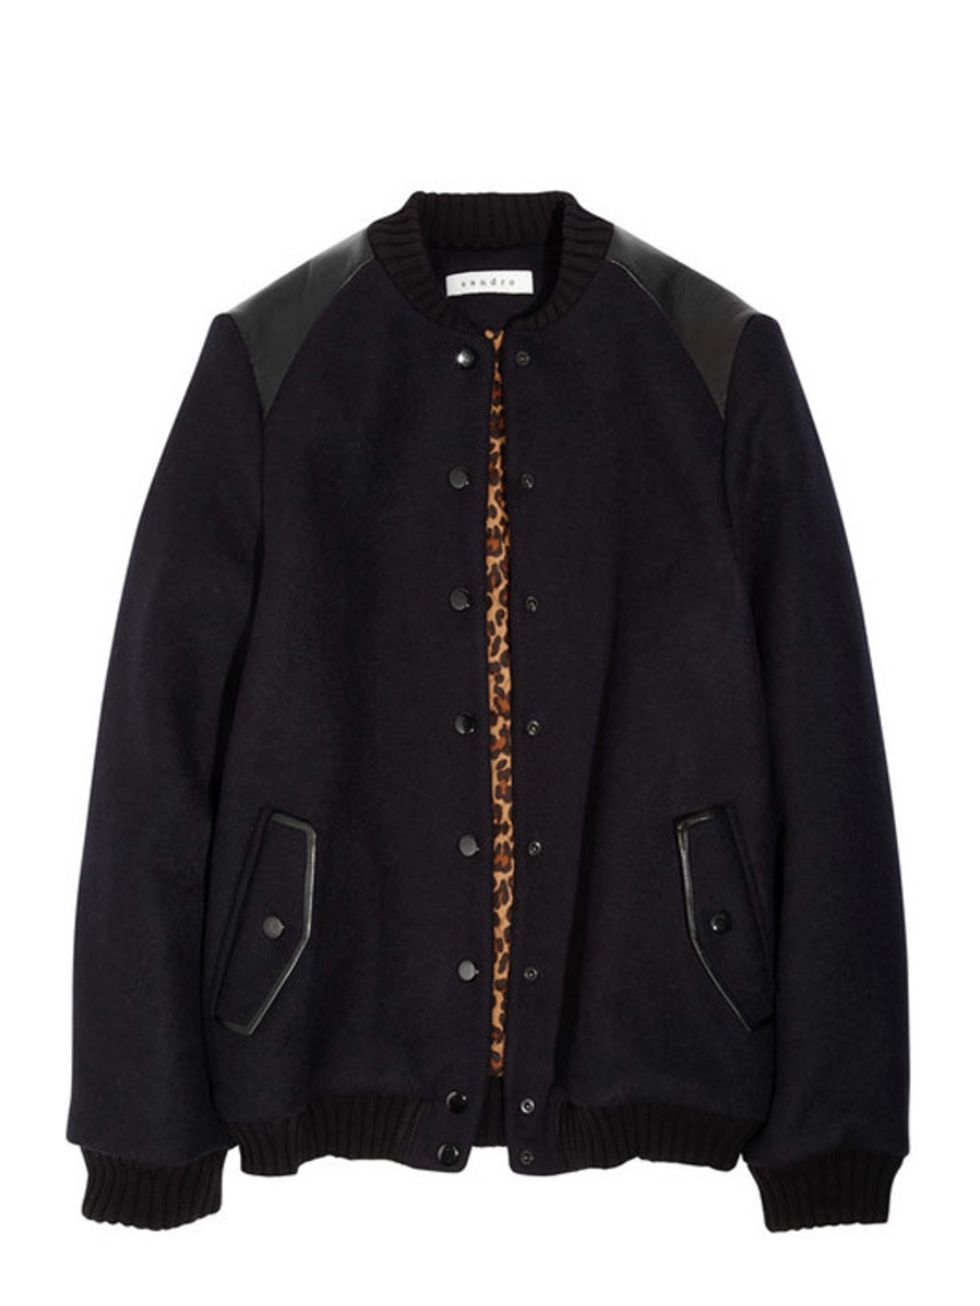 <p>Sandro wool and leather bomber jacket, £340, at <a href="http://www.net-a-porter.com/Shop/Designers/Sandro/All">Net-a-Porter </a></p>